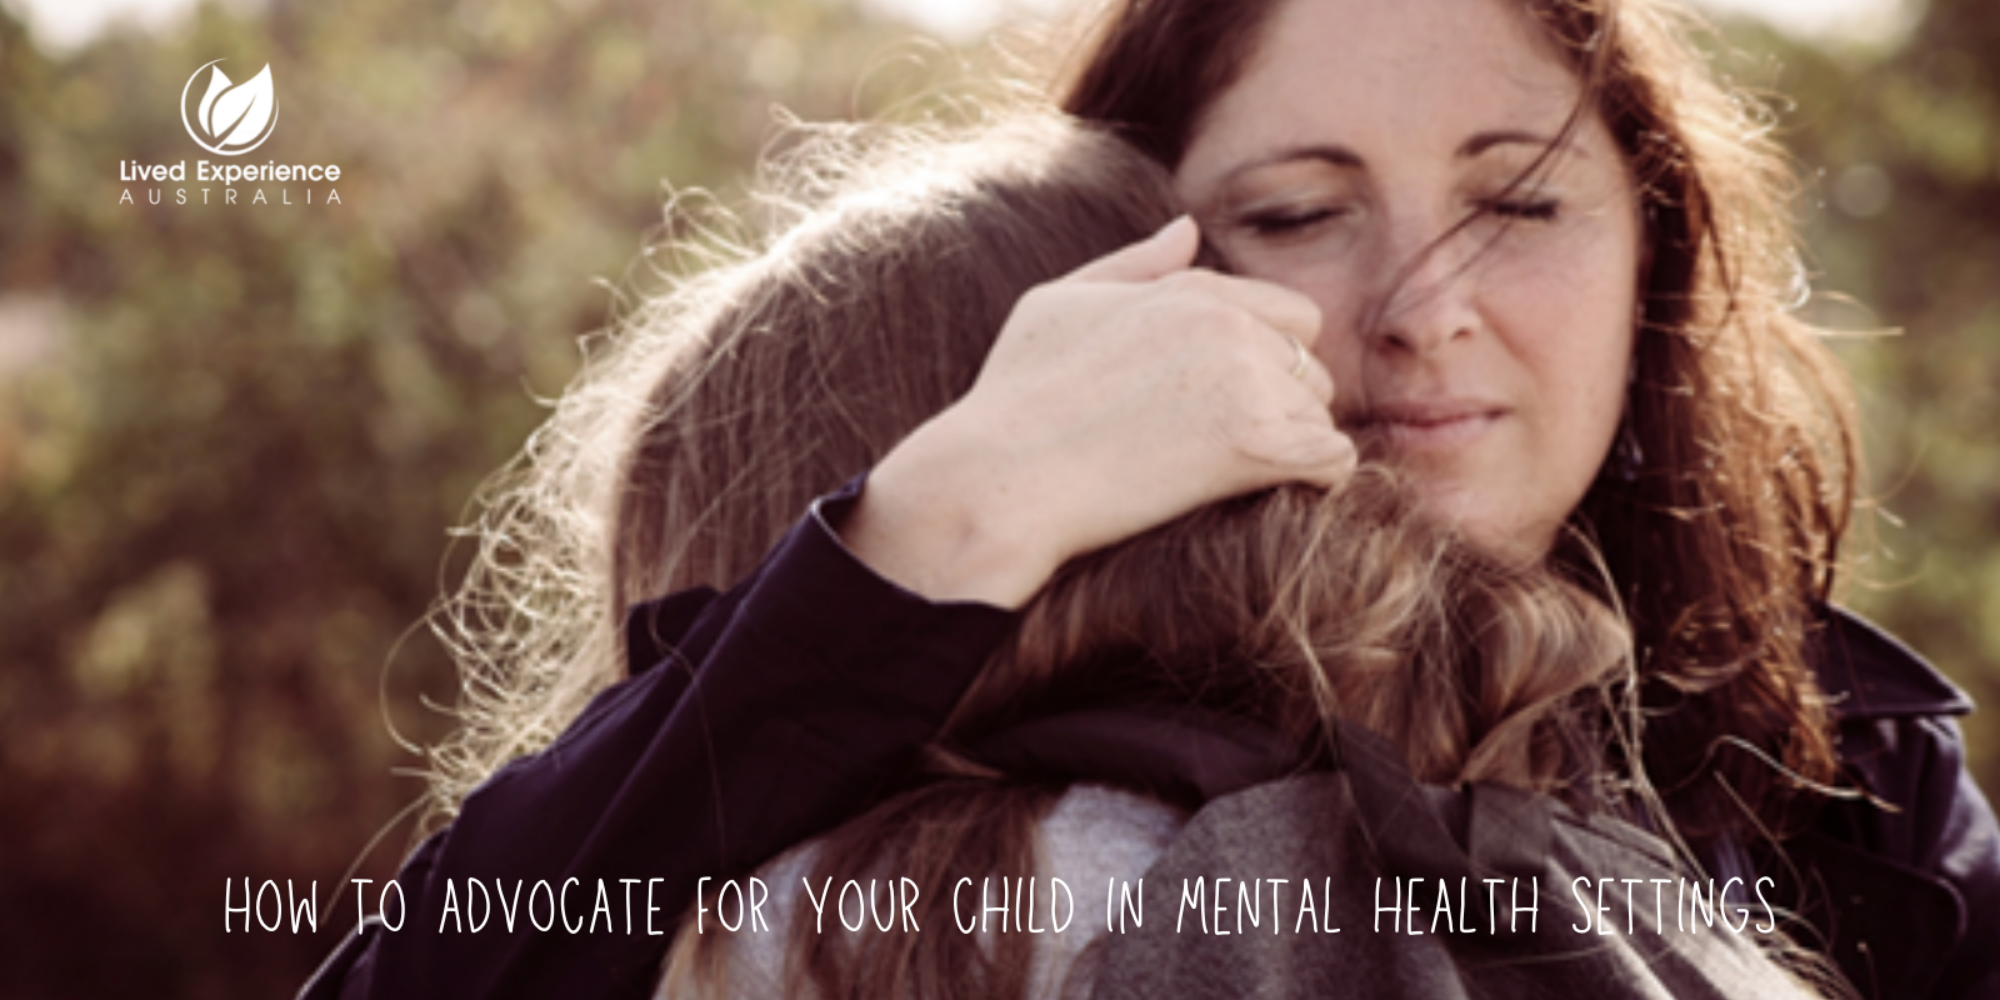 How to advocate for your child in mental health settings